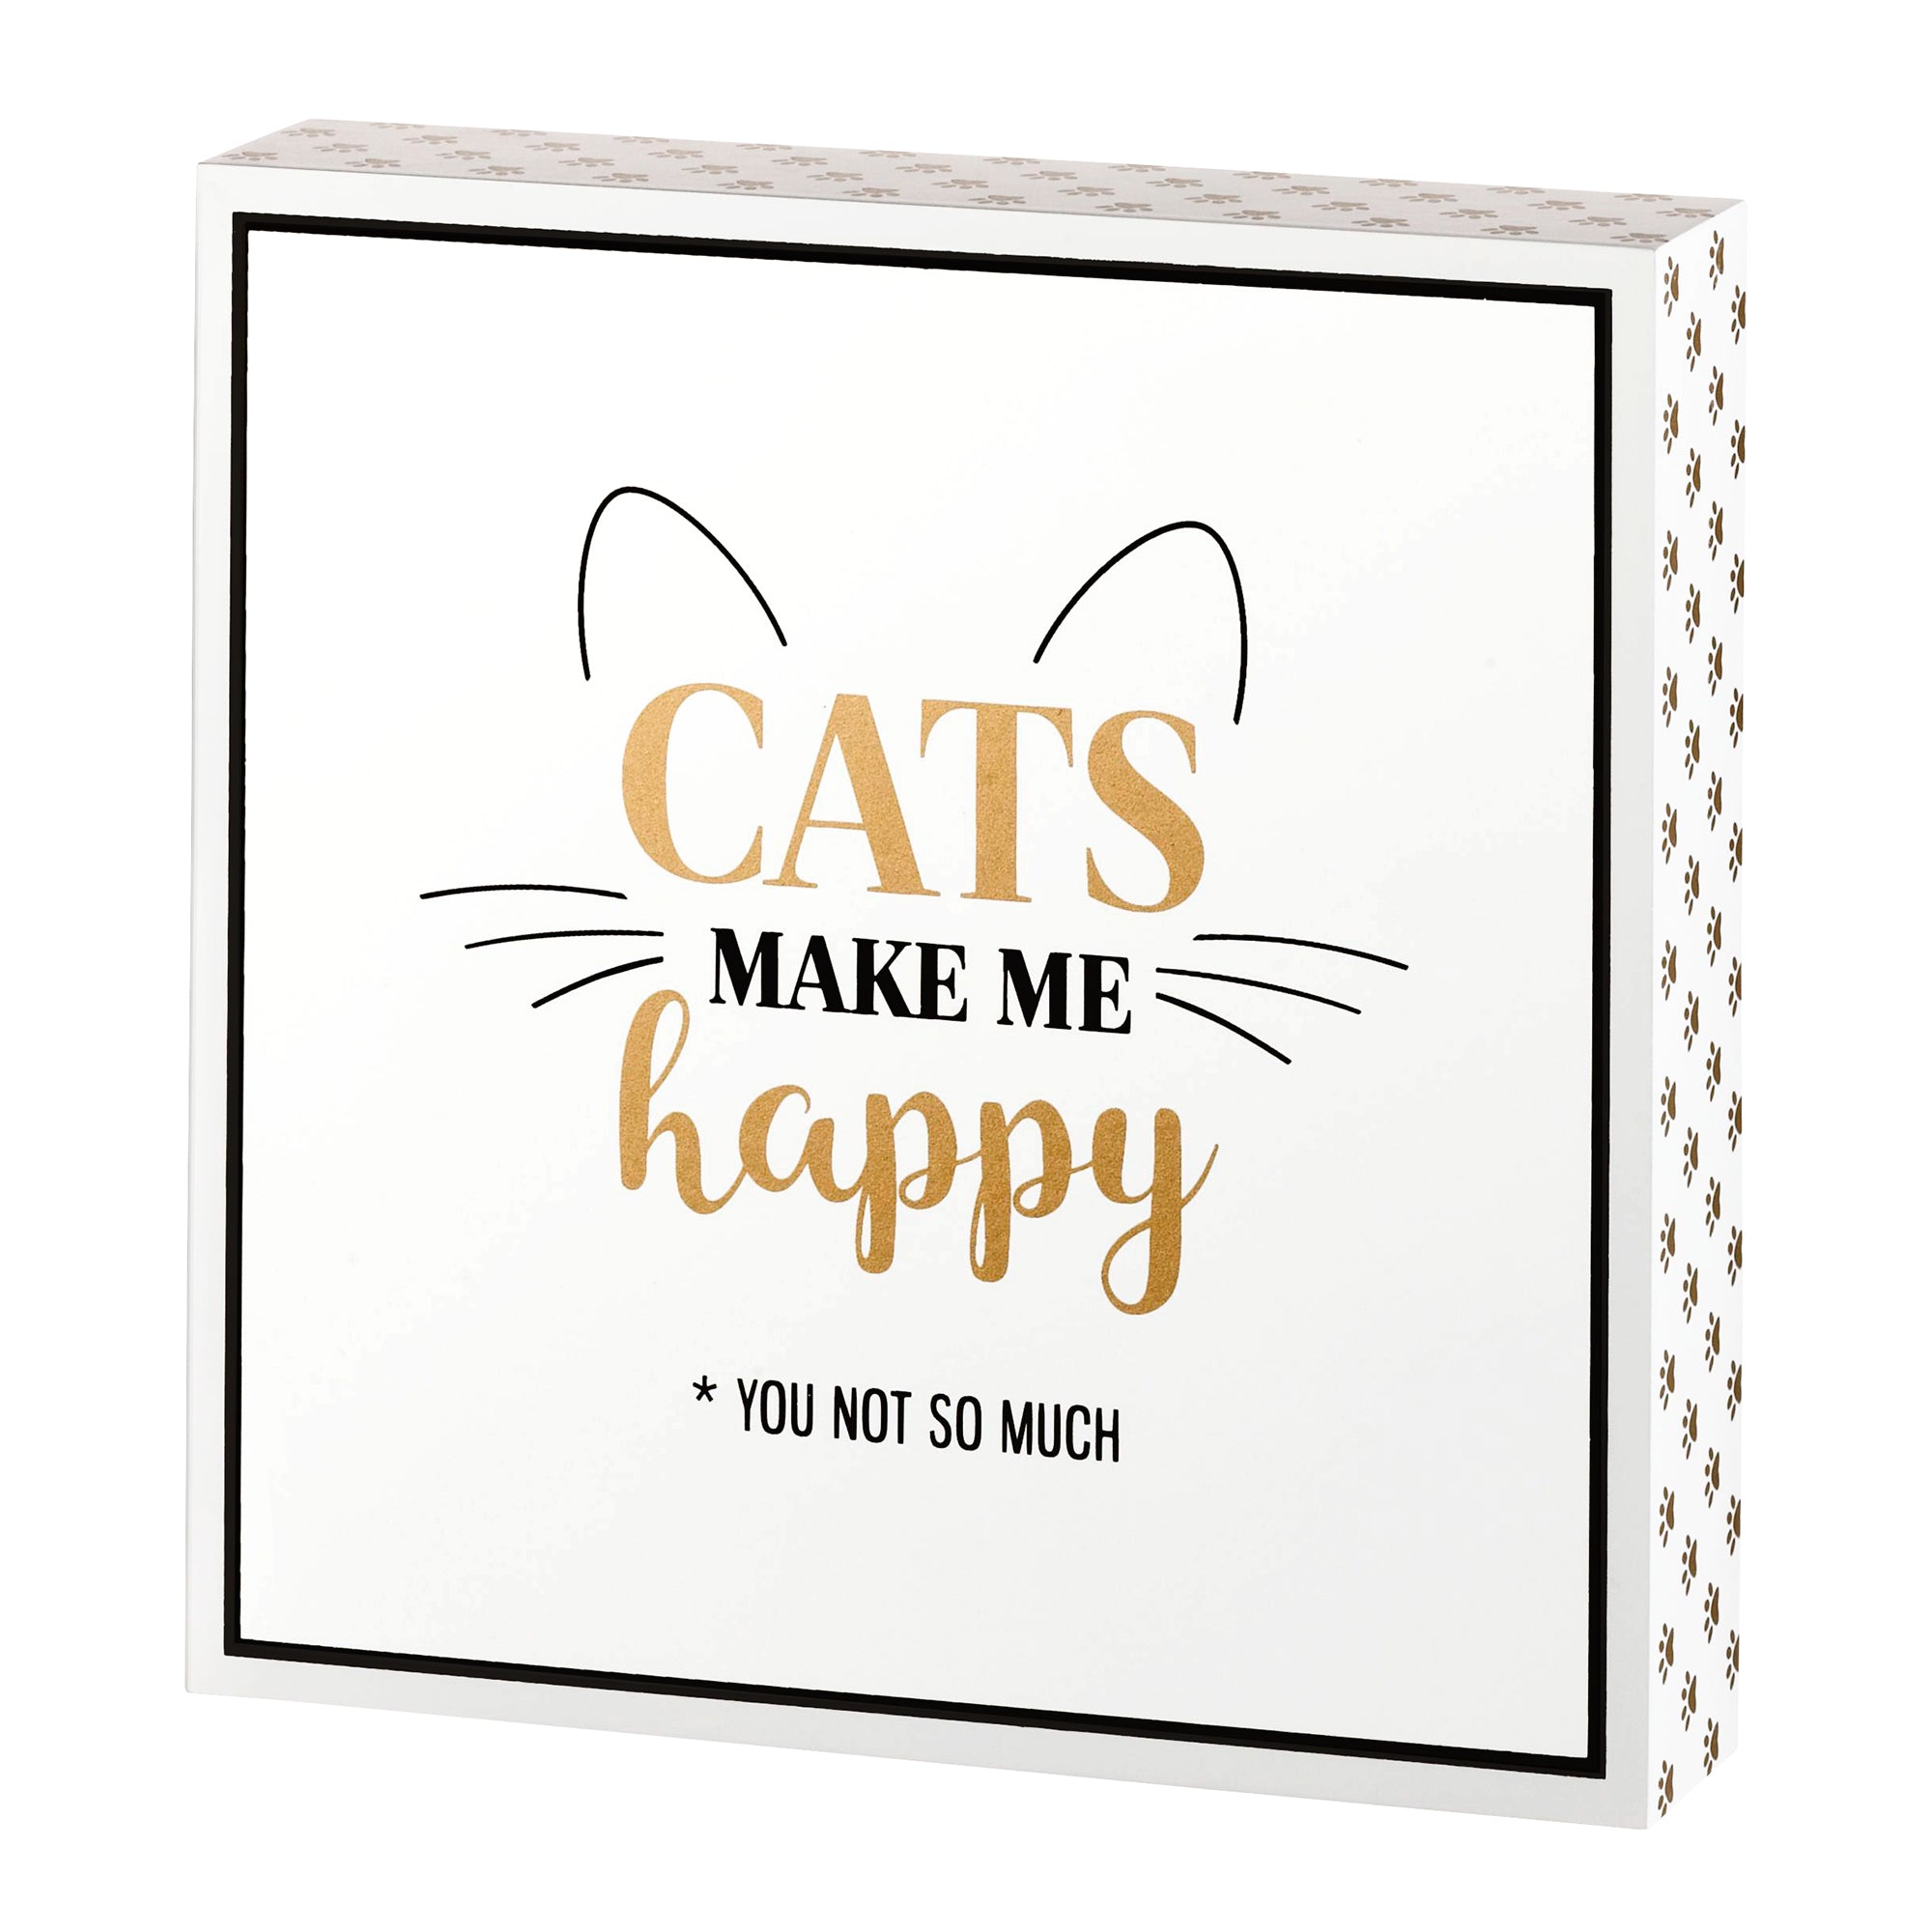 Cat Lover Gift Sign with Funny Saying